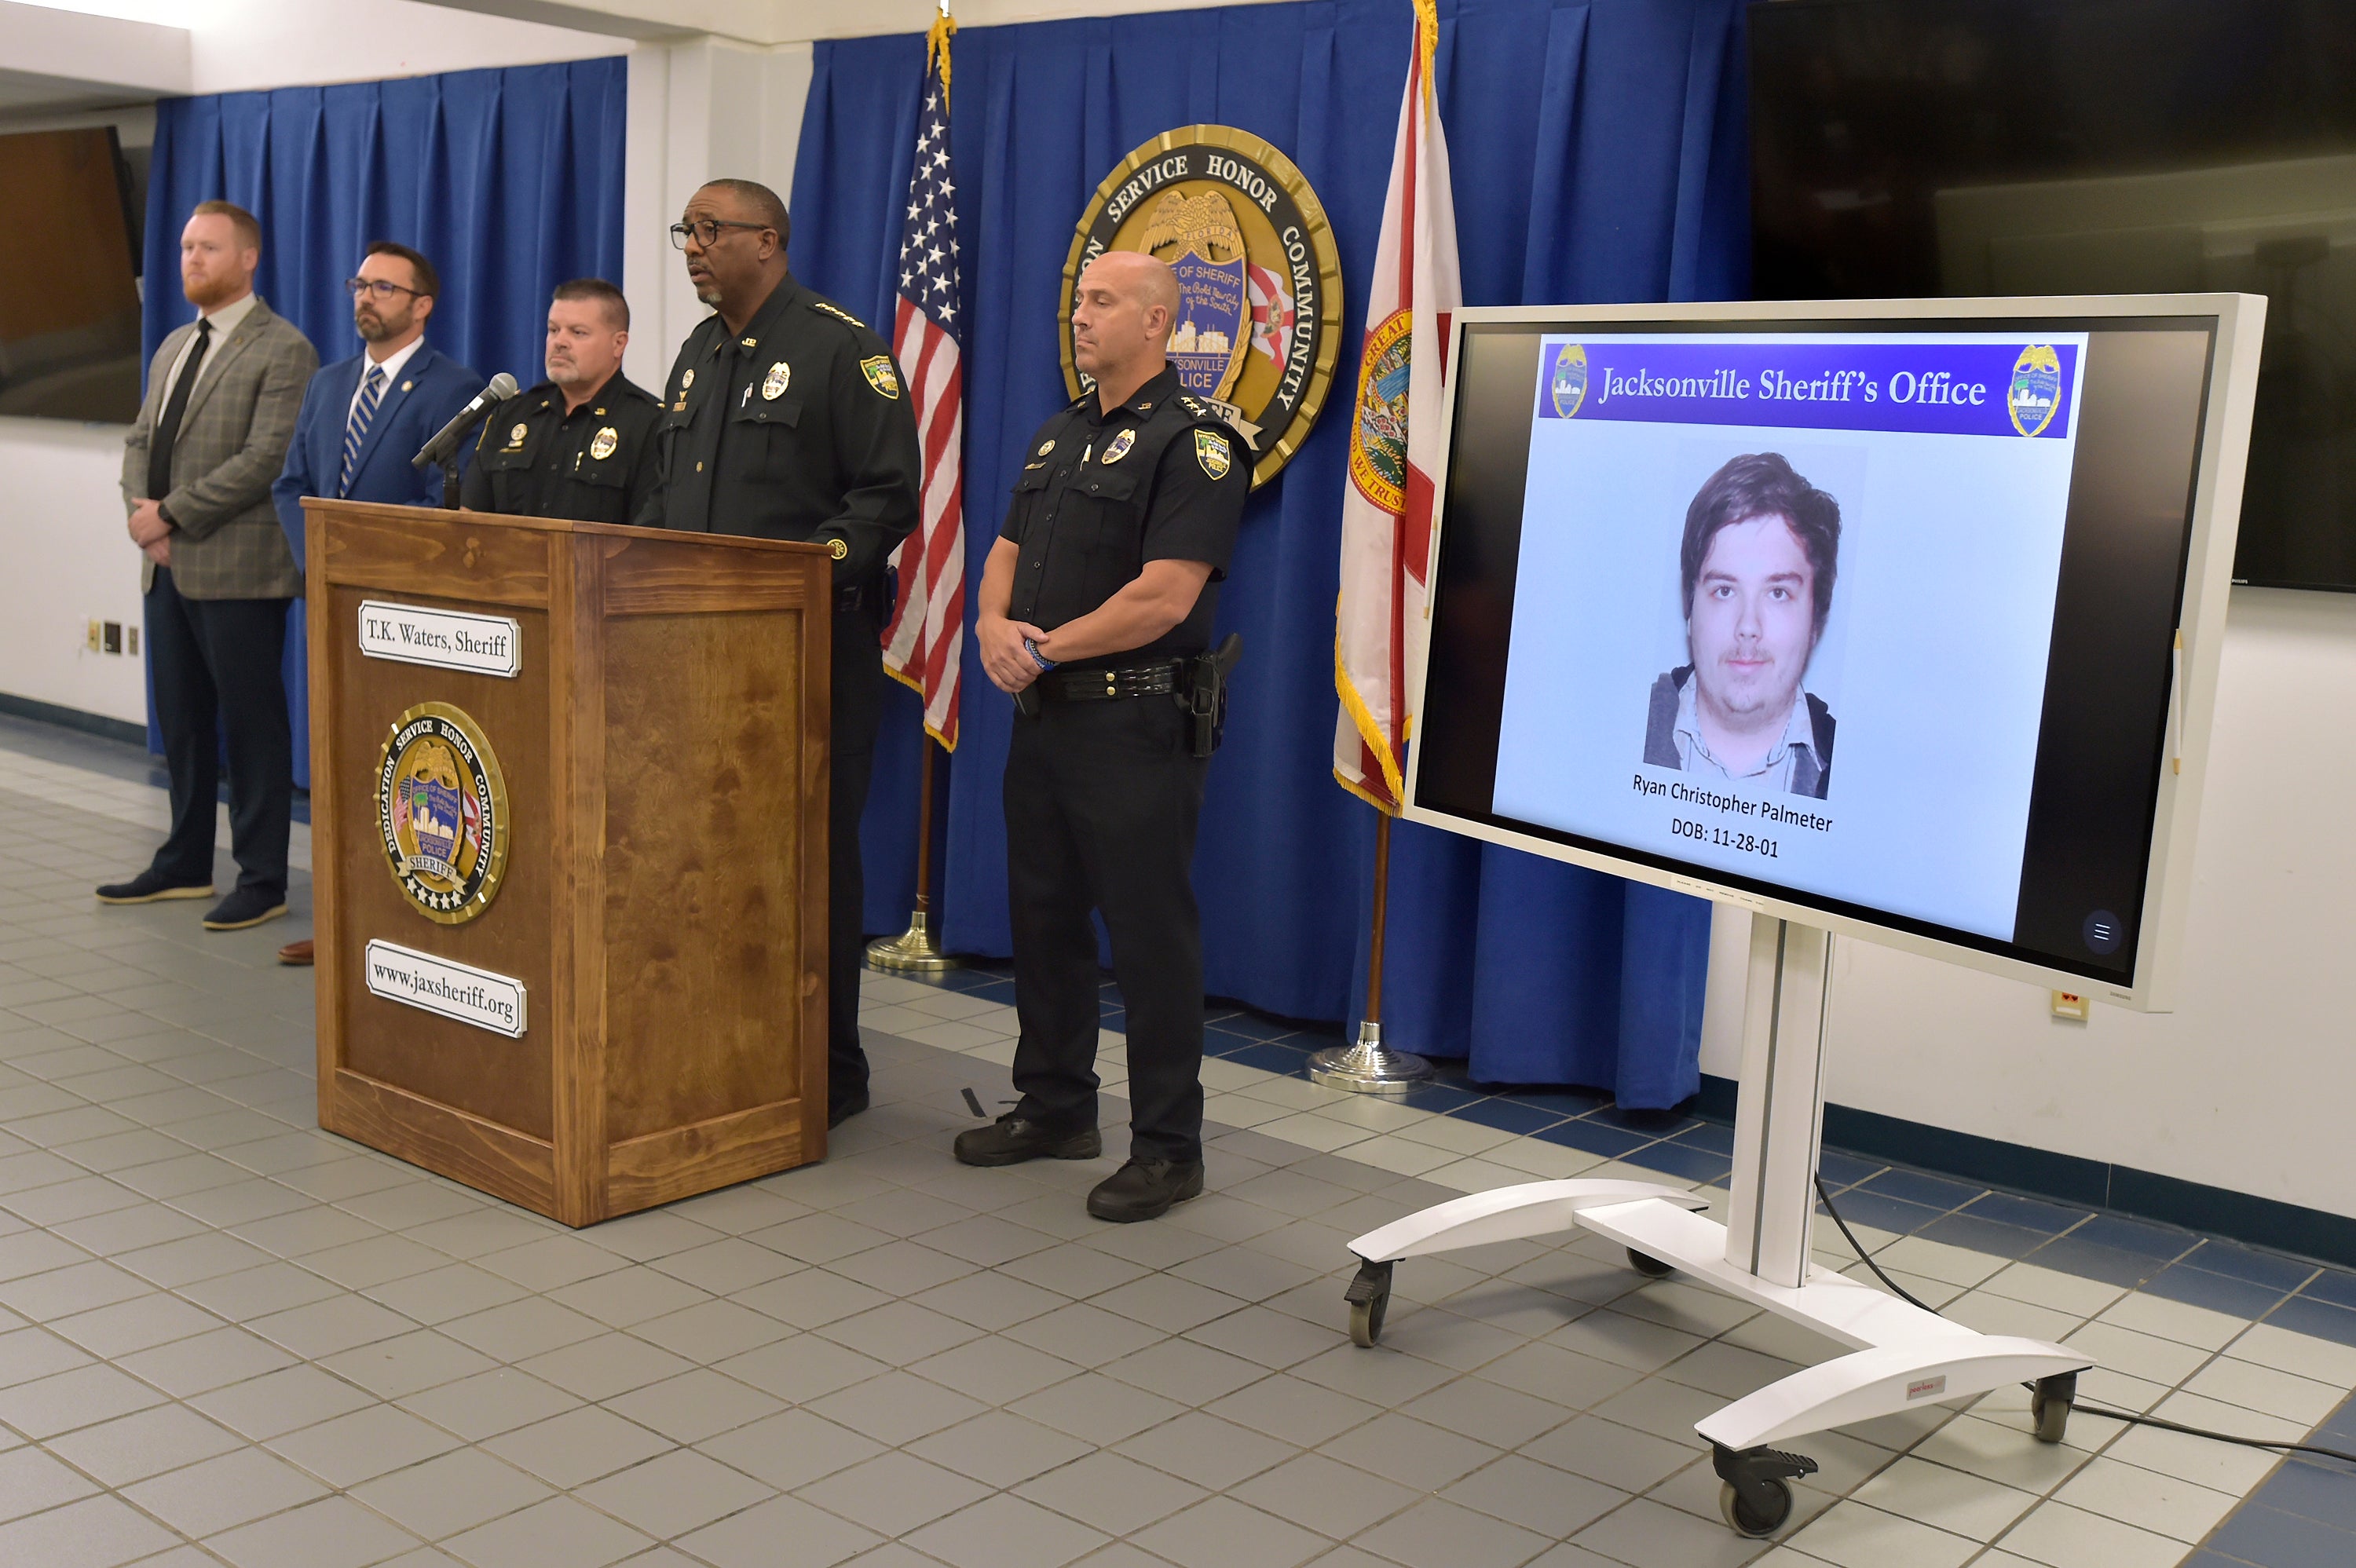 A photograph of shooter Ryan Christopher Palmeter is shown on a video monitor during Sheriff TK Waters’ press conference at the Jacksonville Sheriff's Office headquarters in Florida on Sunday